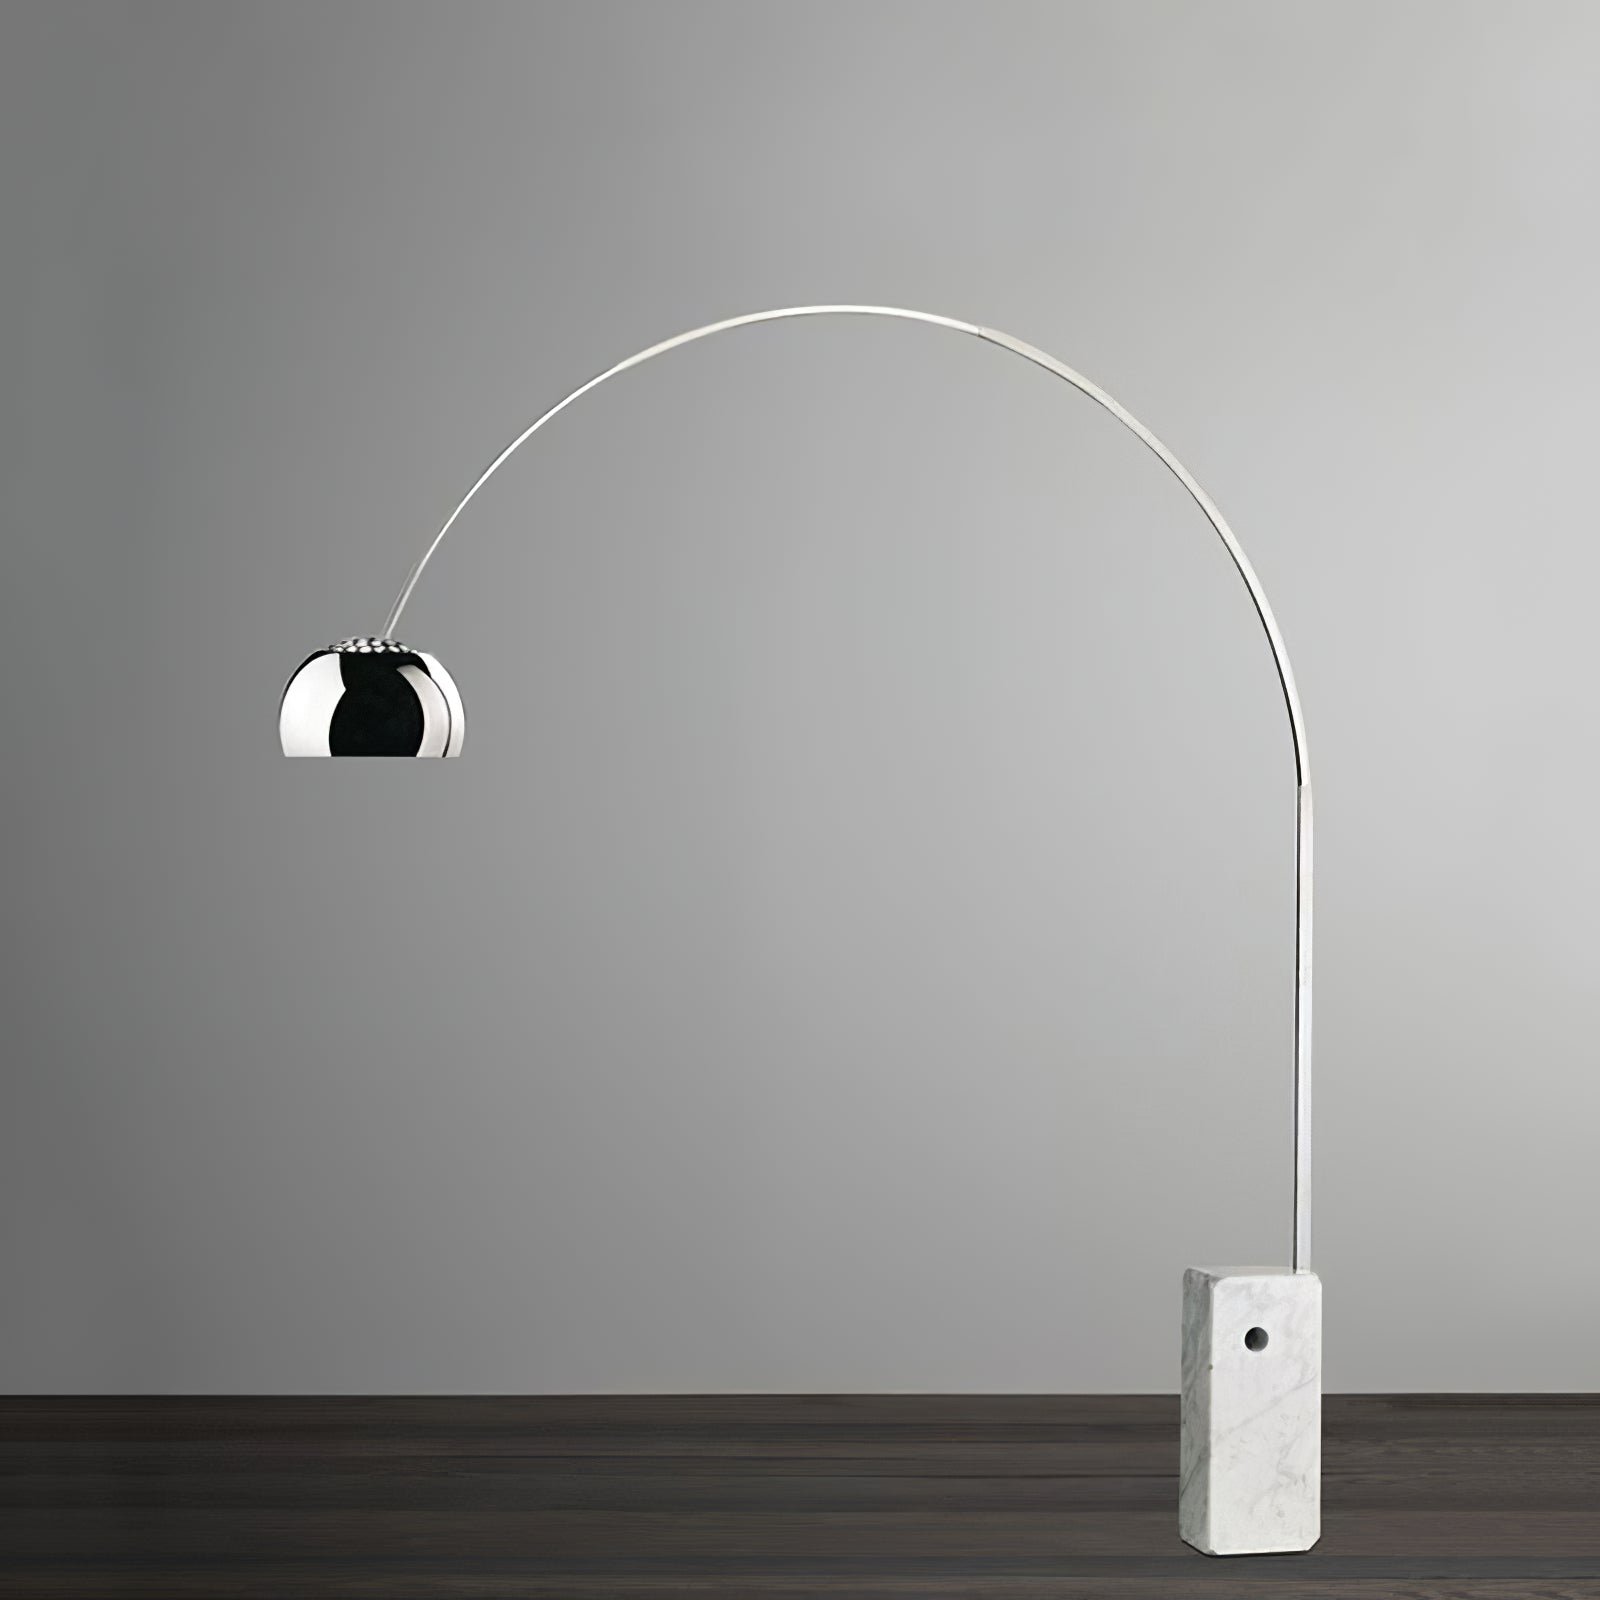 Arco Floor Lamp with Square Tube and EU Plug, measuring 66.9″ x 74.8″ (W) or 170cm x 190cm (H)